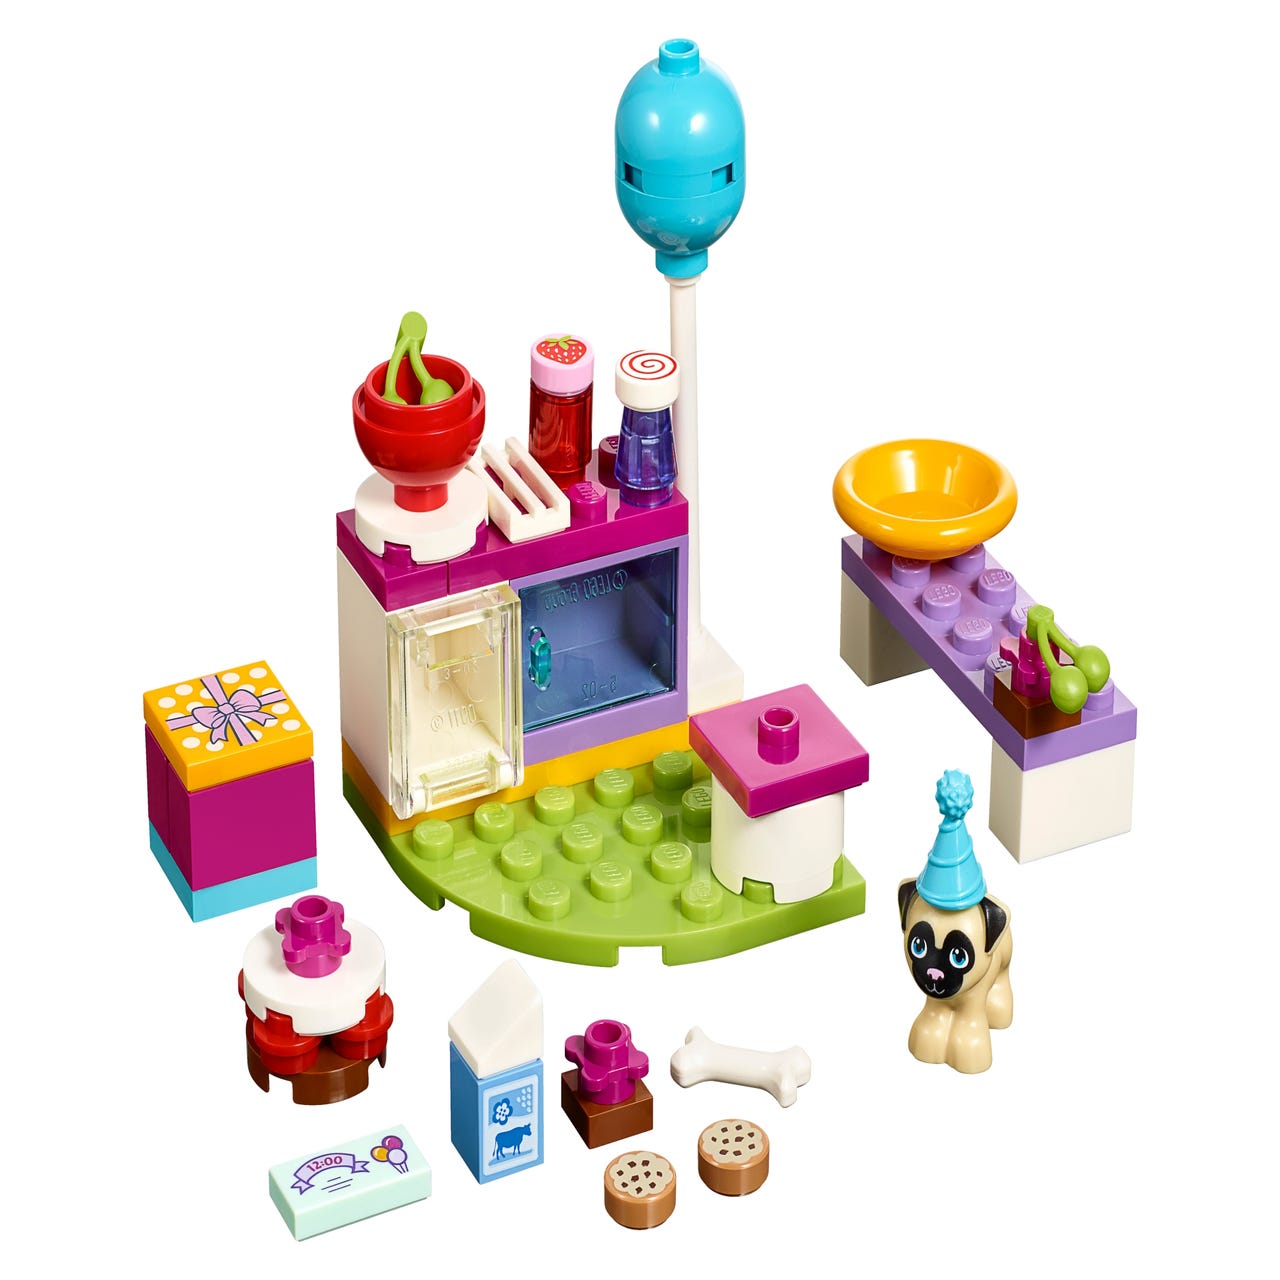 Party Cakes Friends Buy Online At The Official Lego Shop Us